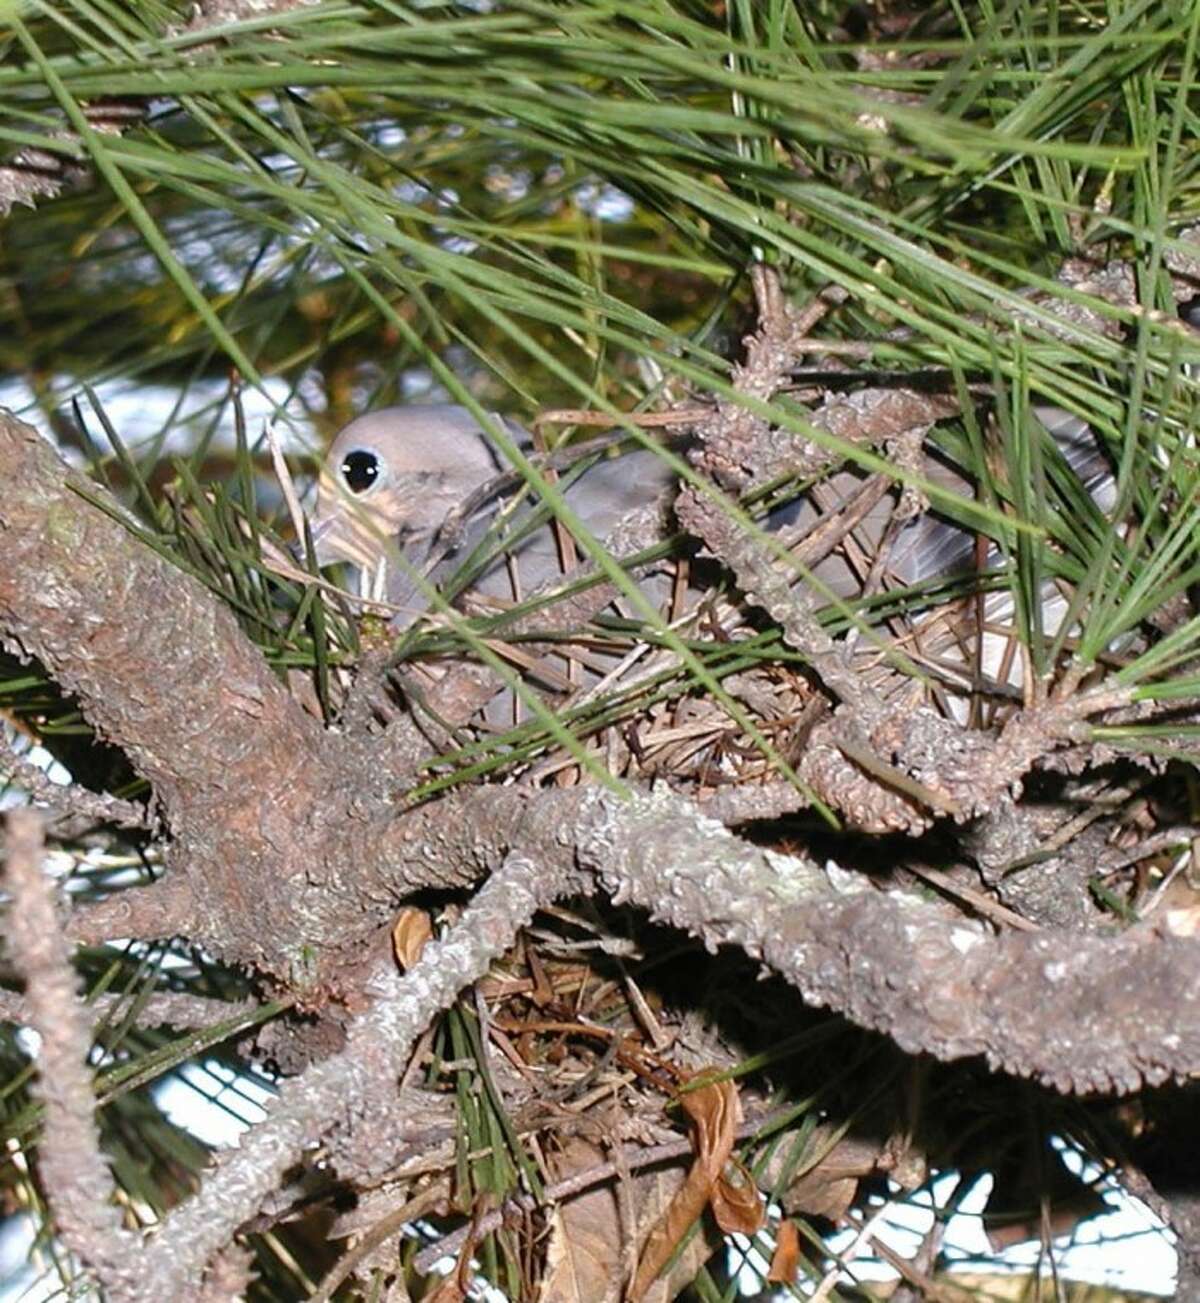 Camouflage concealed this dove in its nest.